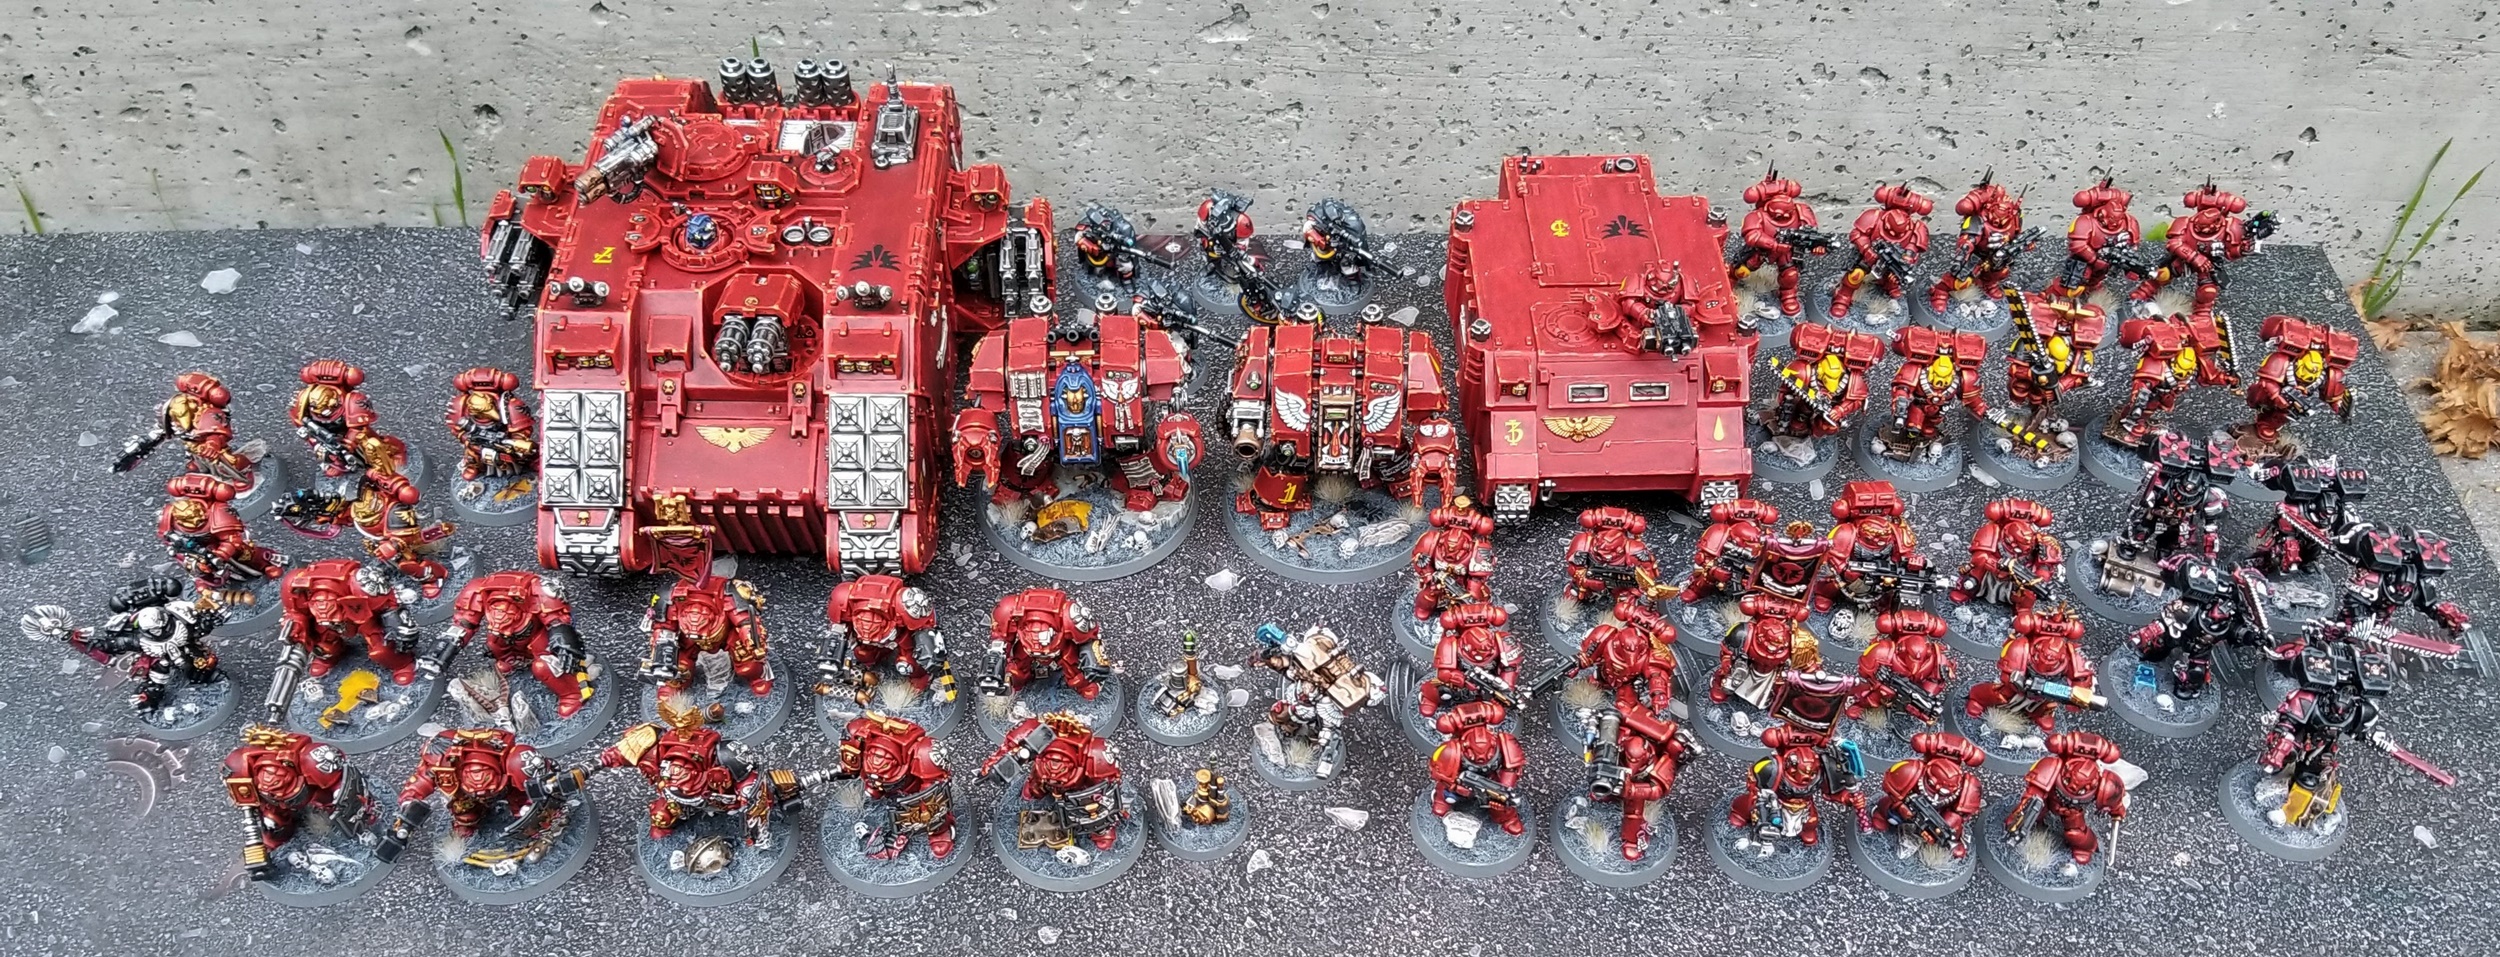 You can still win a Blood Angels or a - Warhammer 40,000